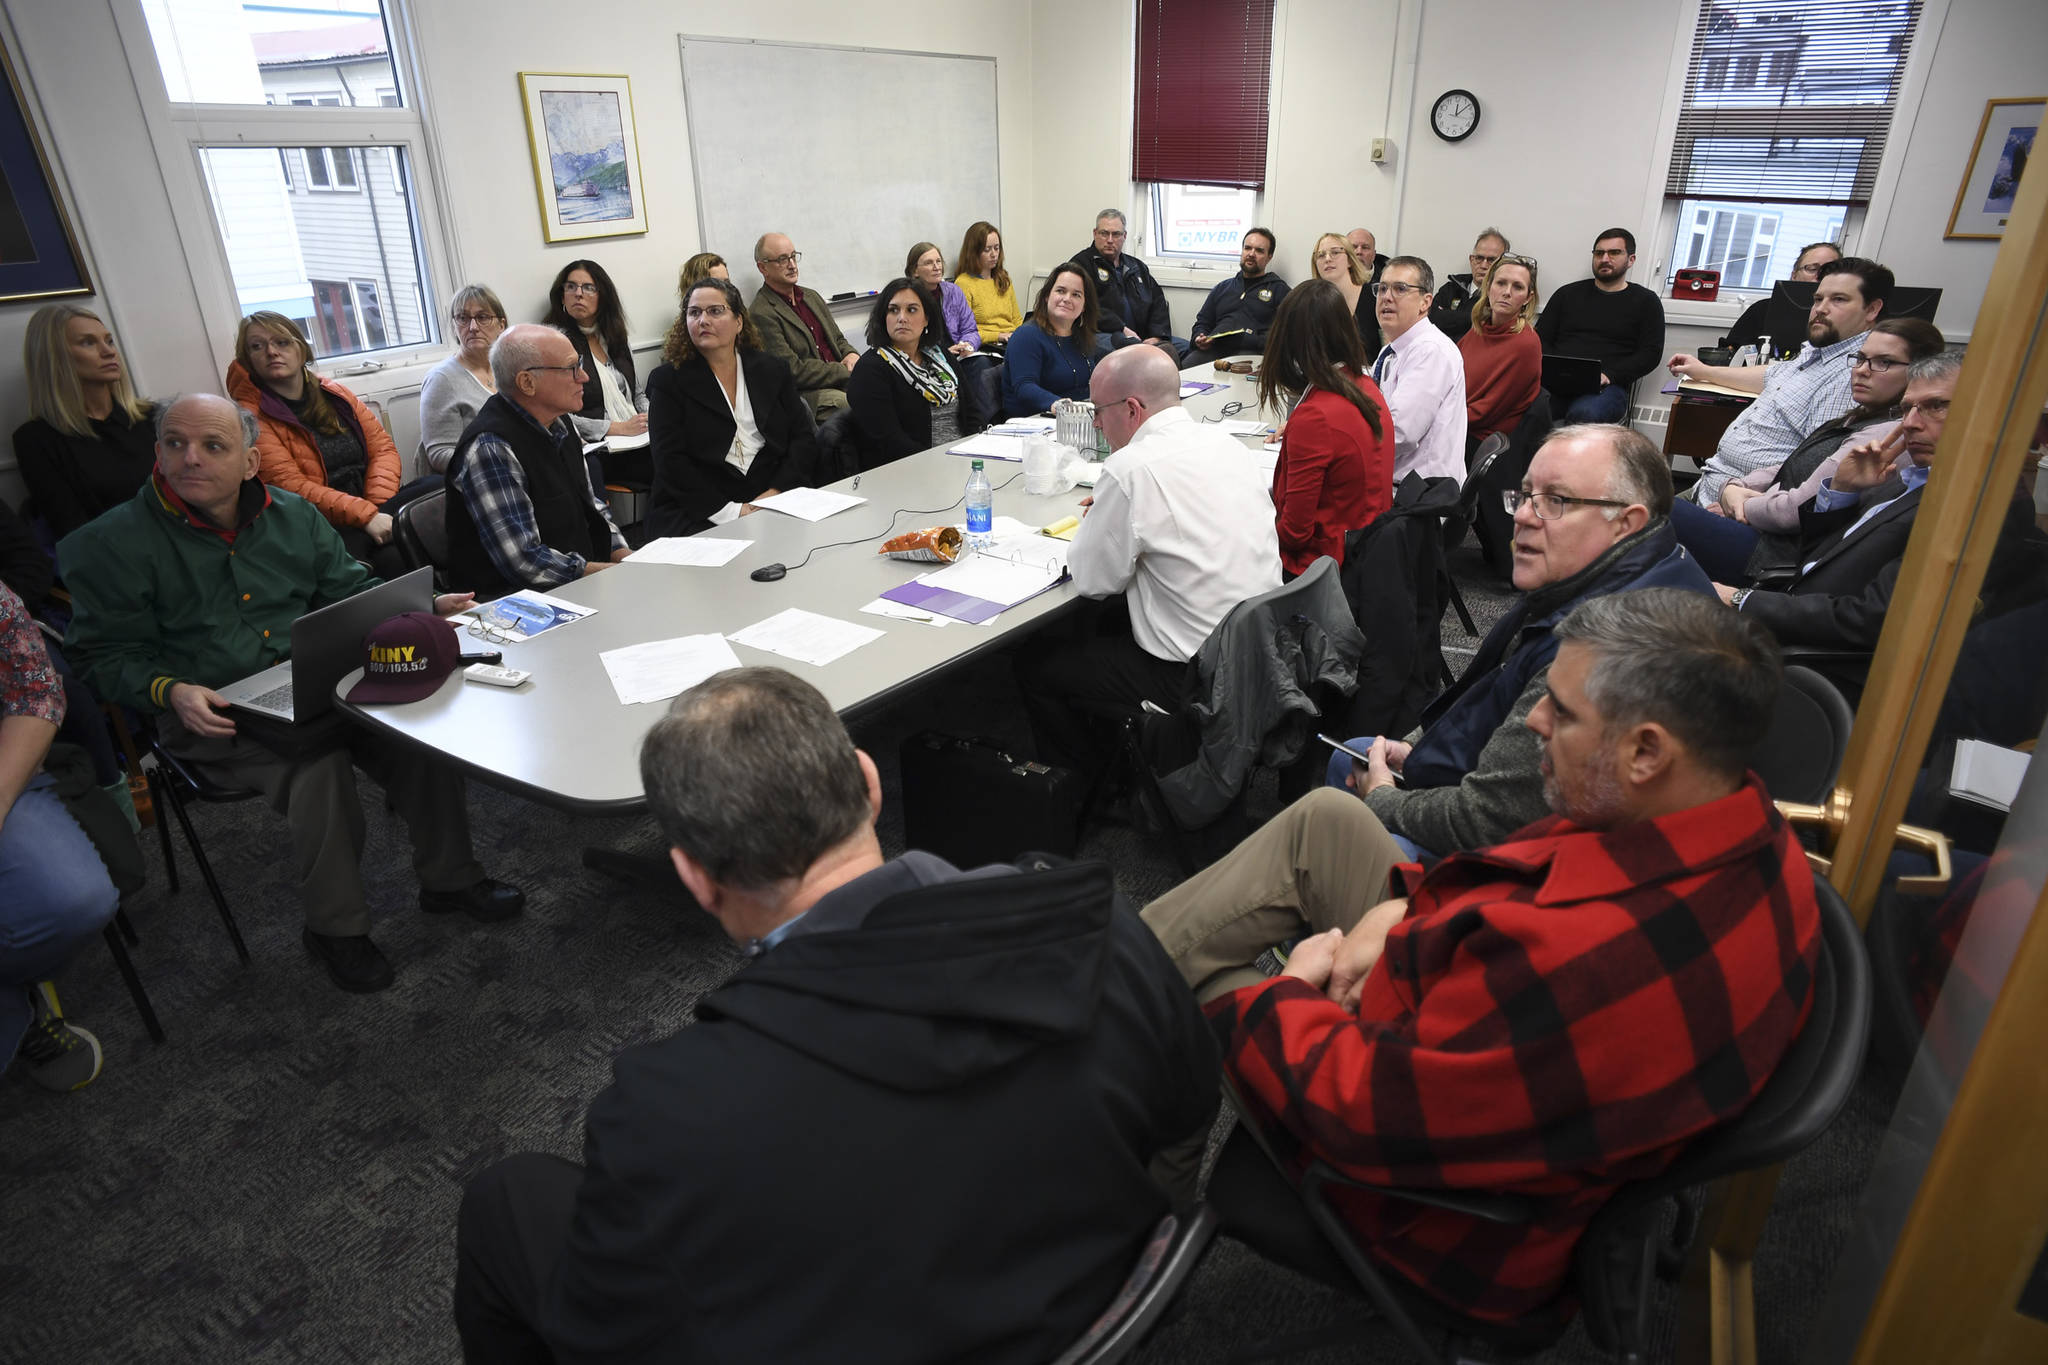 Members of the Visitor Industry Task Force, city employees and the public watch as City Manager Rorie Watt gives a presentation on the growth of the cruise ship industry in Juneau during a noon meeting at City Hall on Tuesday, Nov. 5, 2019. (Michael Penn | Juneau Empire)